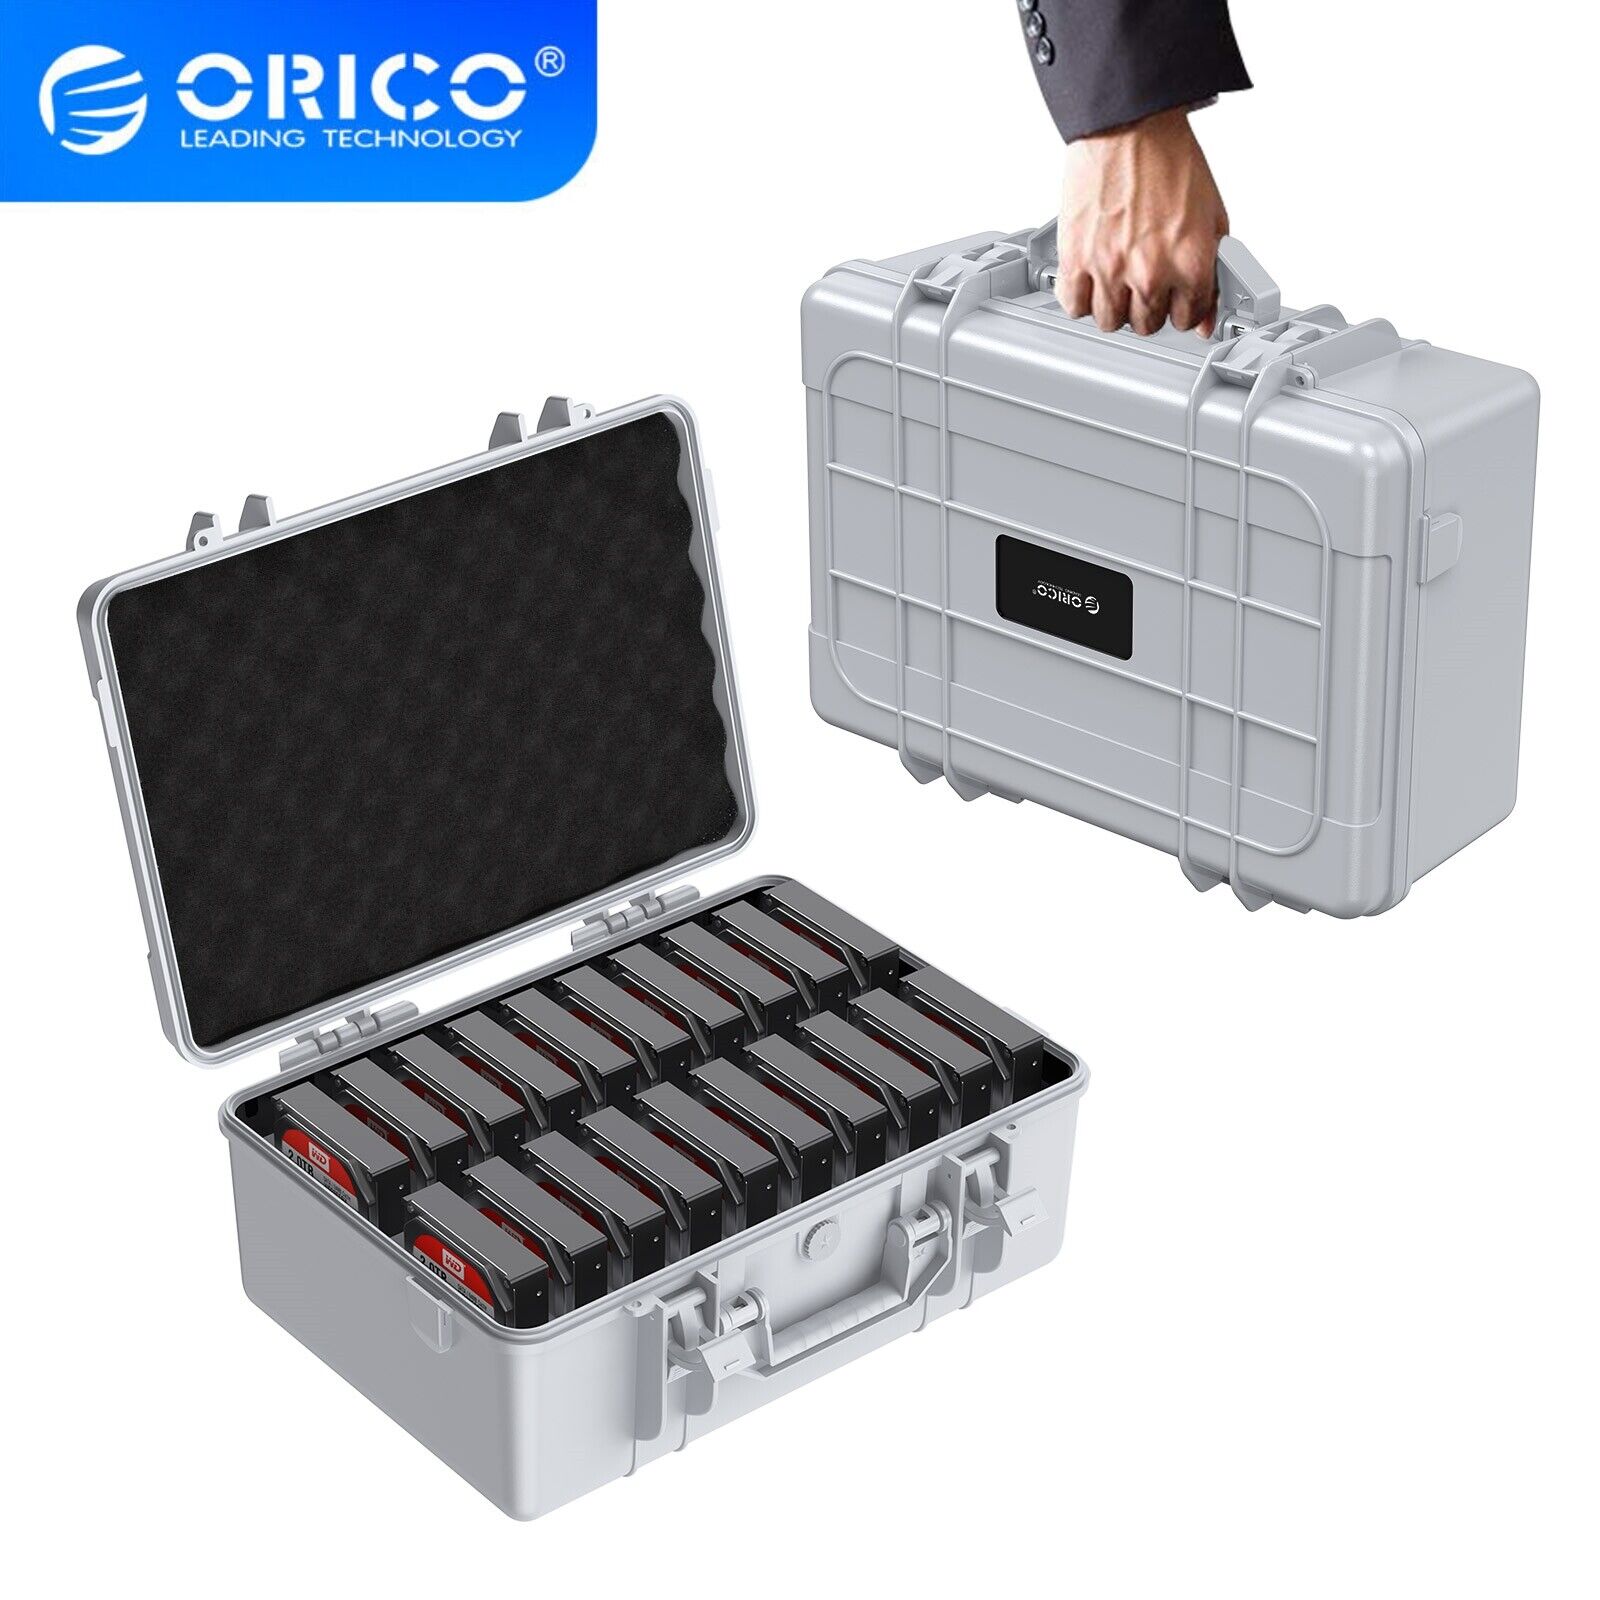 ORICO Hard Drive Case 20 Bay Shockproof Anti-Static for for WD/Seagate/Toshiba